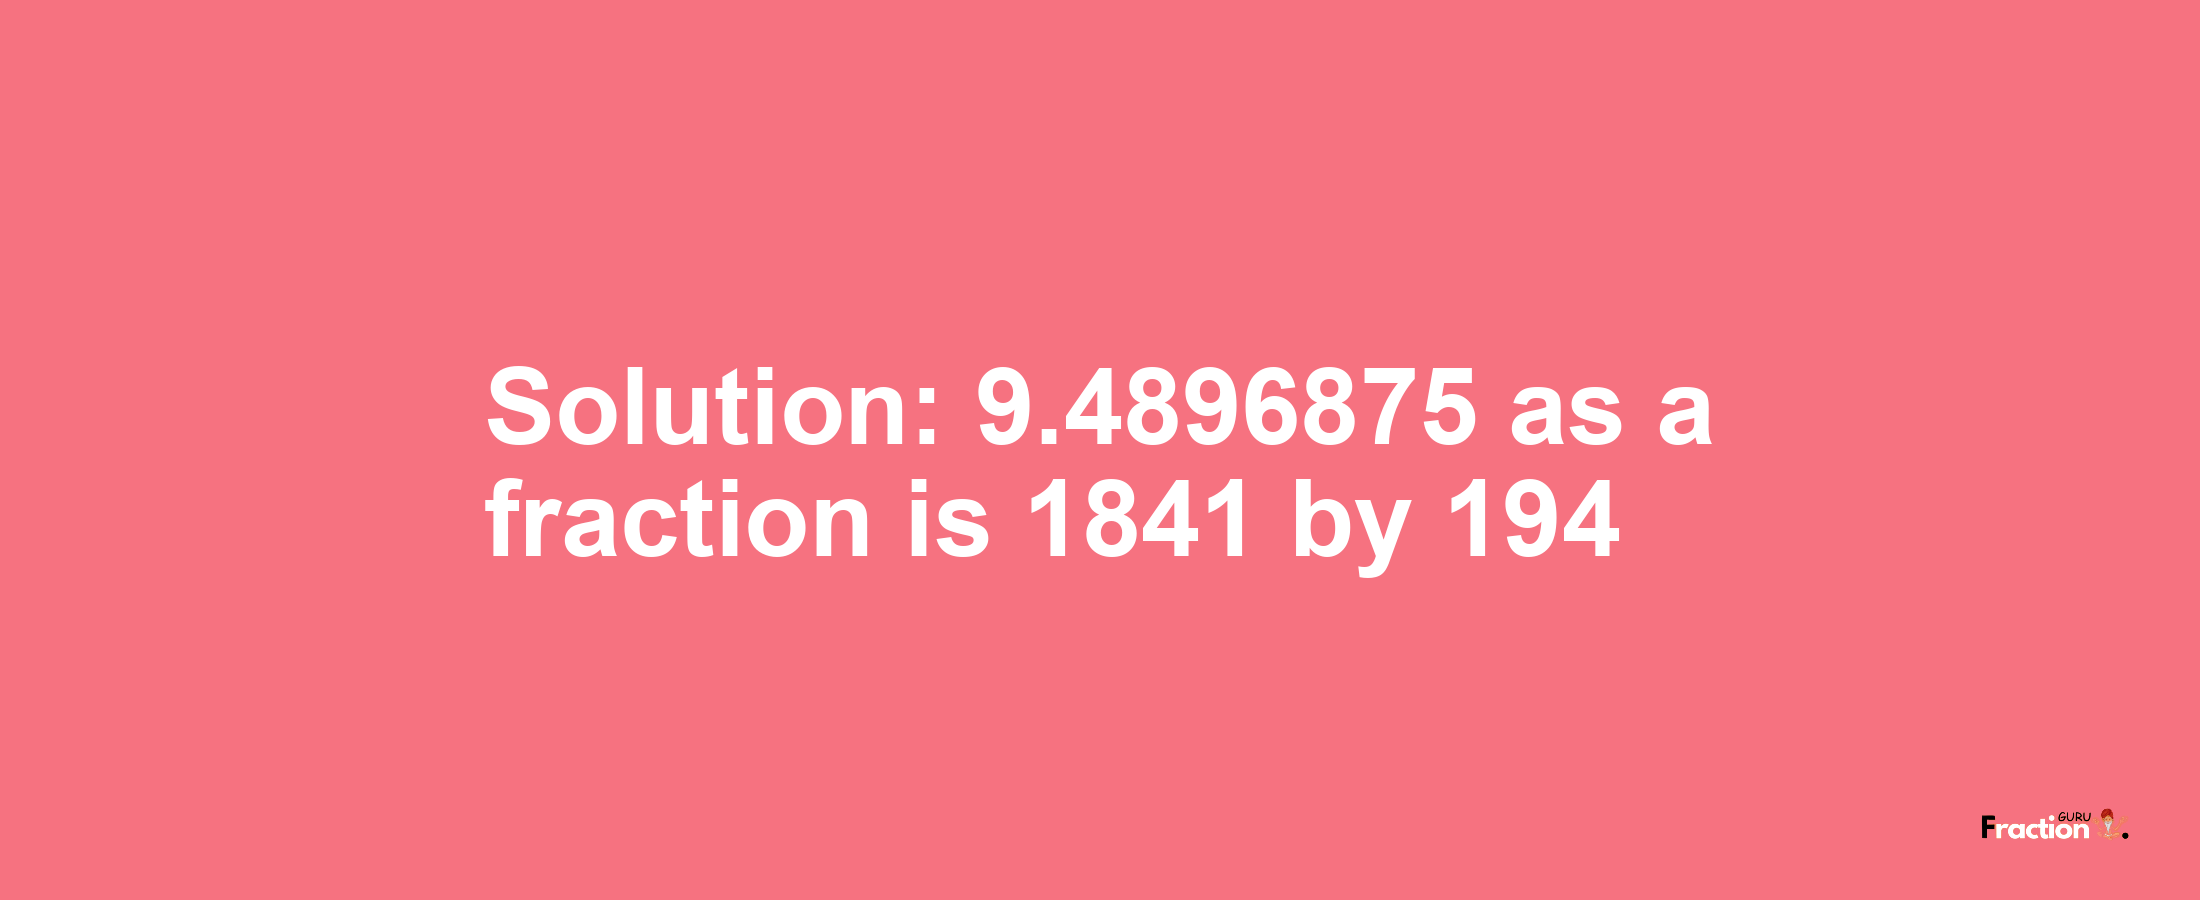 Solution:9.4896875 as a fraction is 1841/194